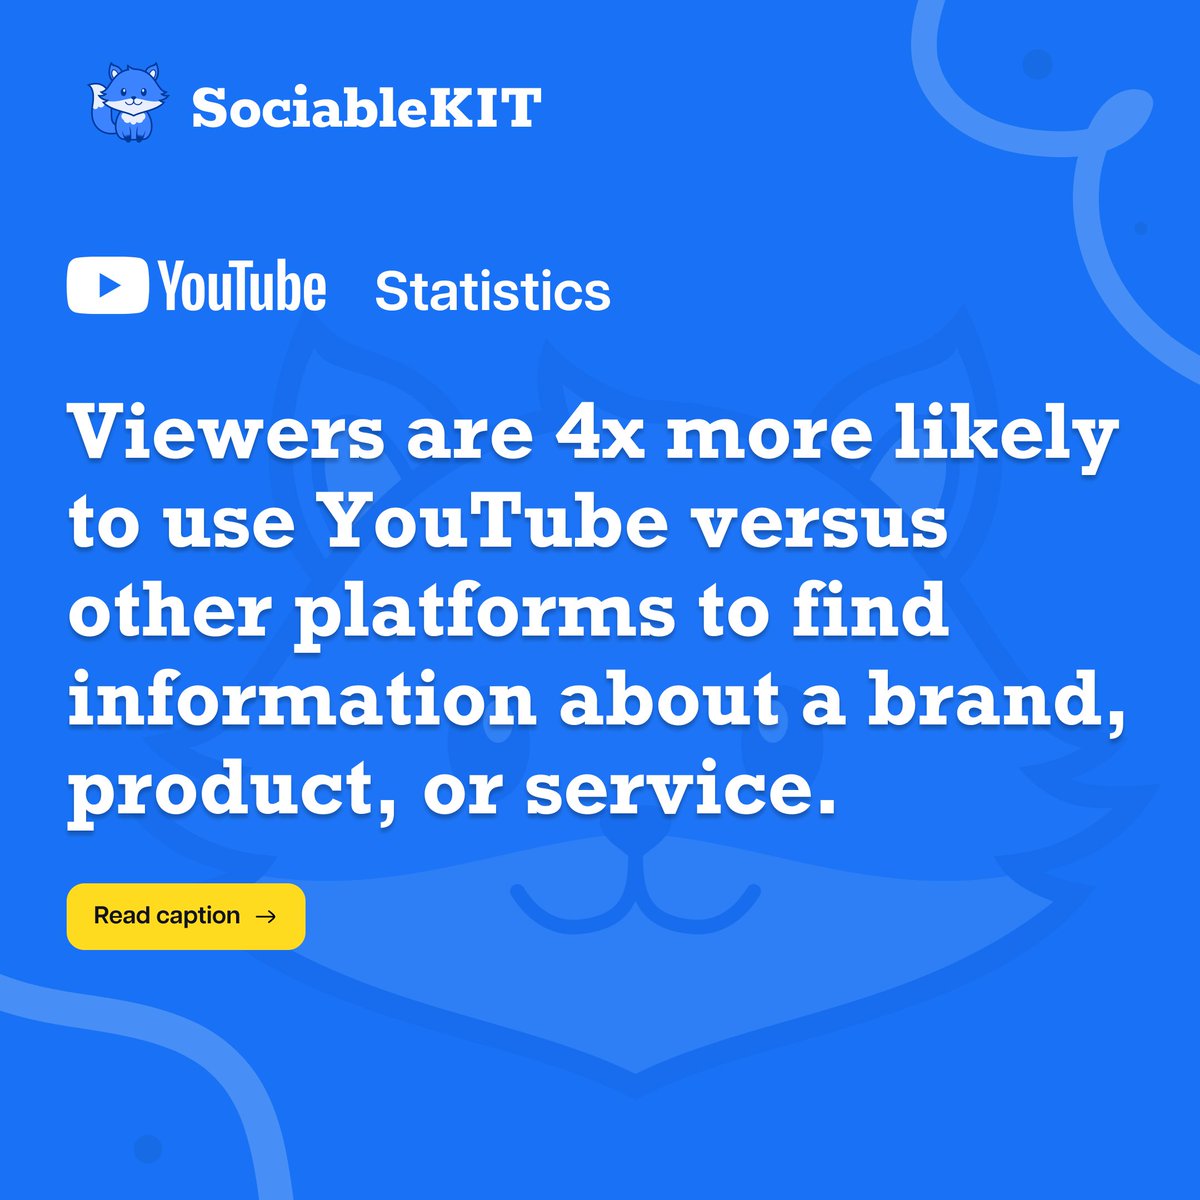 Looking for info on brands, products, or services? 

Turns out, you're 4x more likely to hit up YouTube than any other platform! It's become the ultimate go-to for consumers seeking info. 

#YouTube #BrandInfo #ProductReviews #EngagementBoost #TrustBuilding #SociableKIT